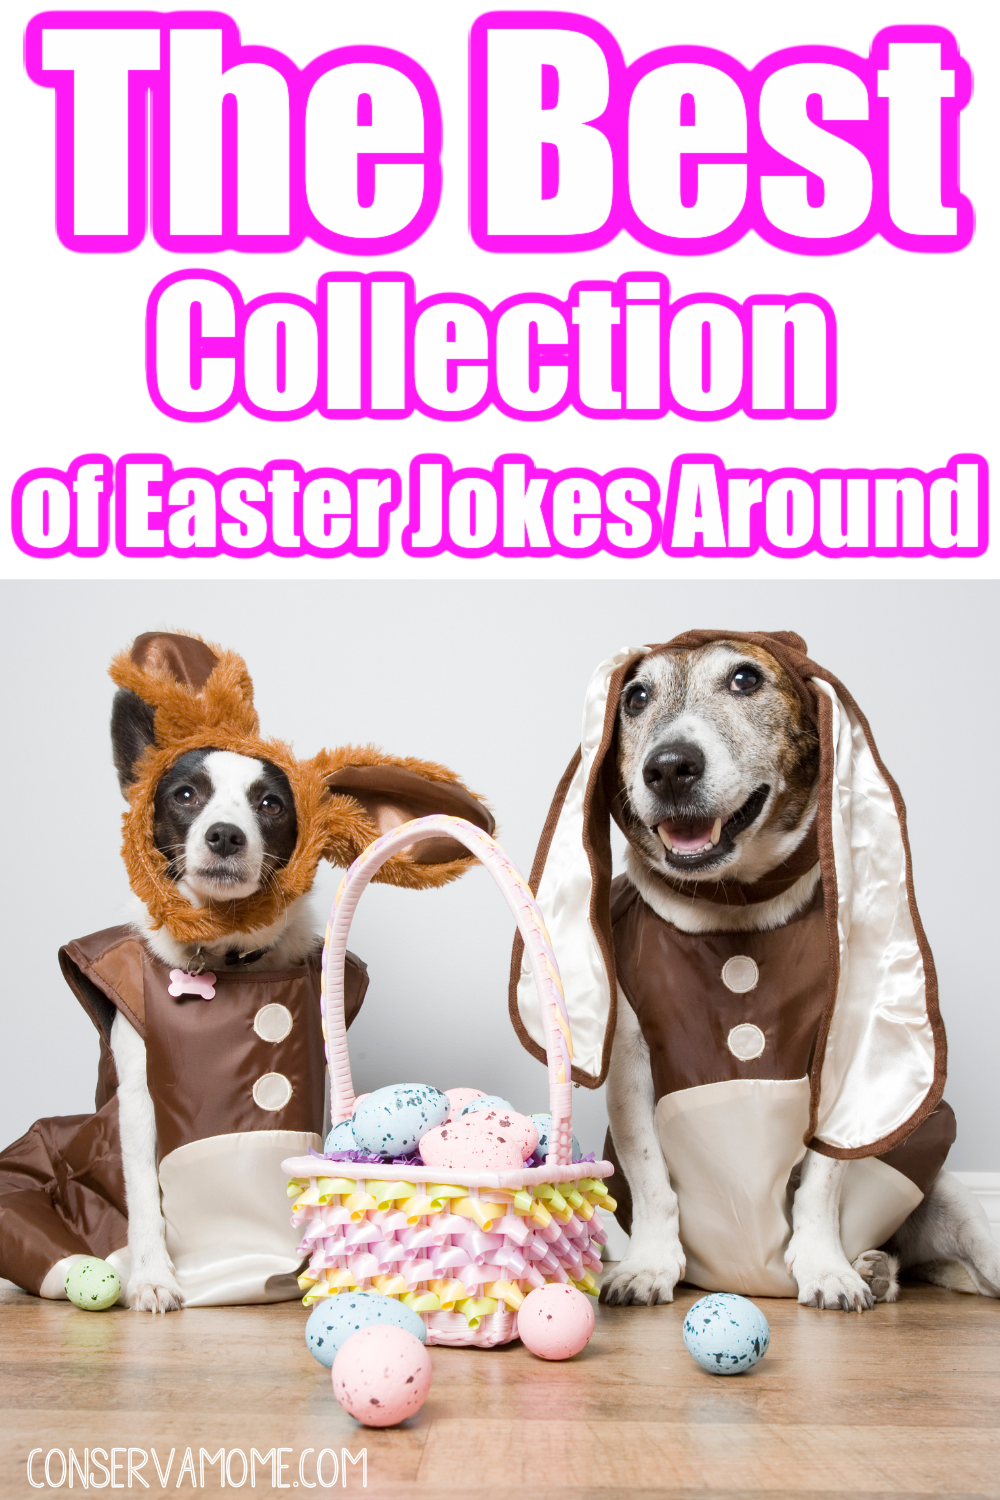 The Best collection of Easter Jokes around